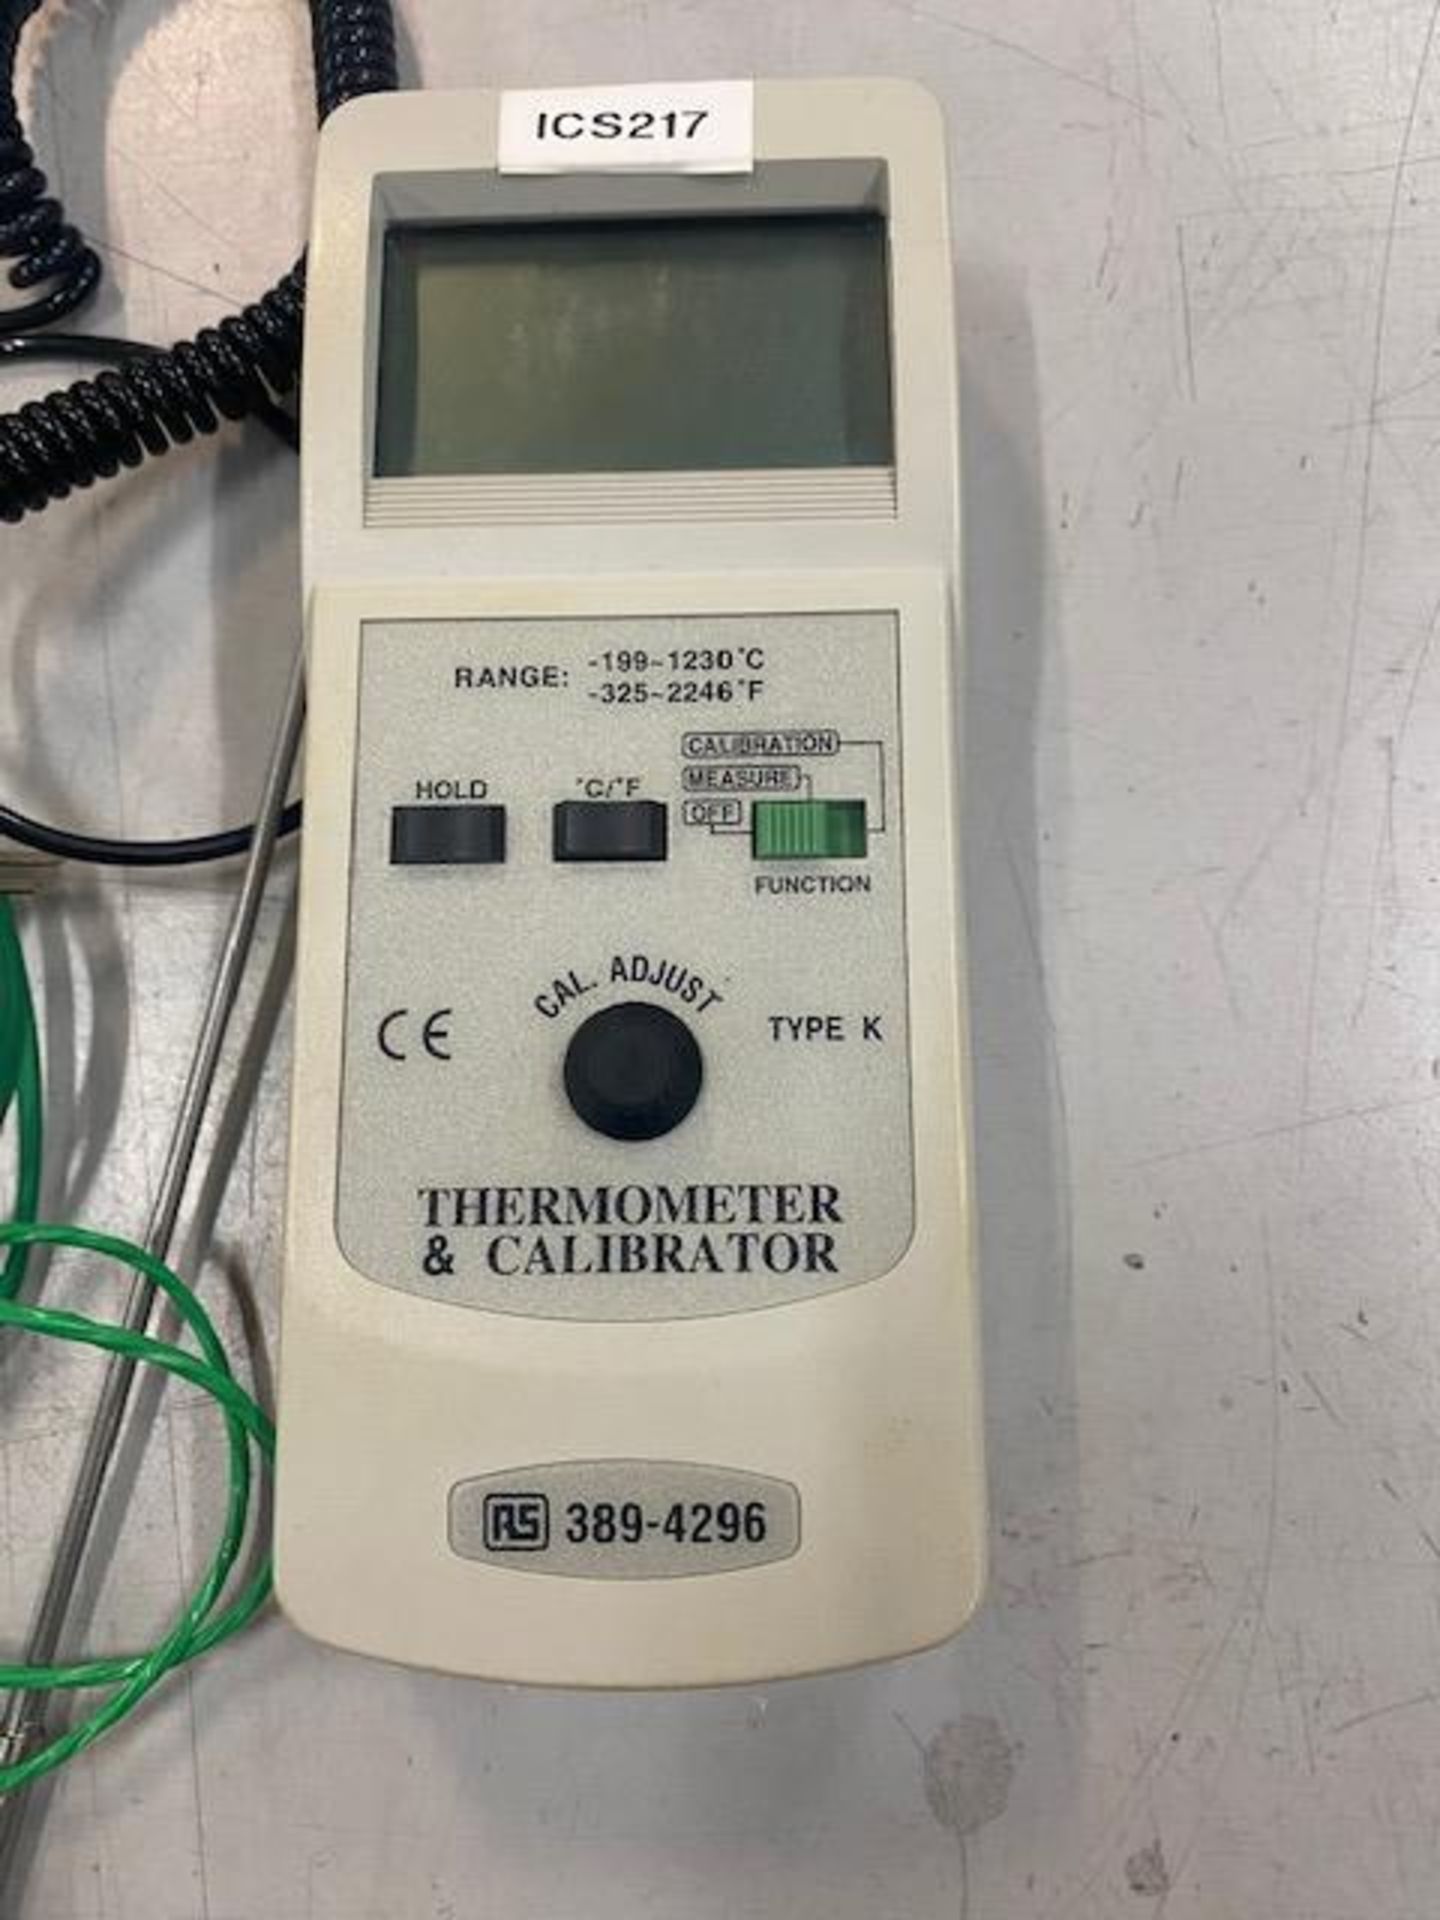 RS 389-4296 thermometer and calibrator, S/N 1208557 (Located Upminster) - Image 2 of 5